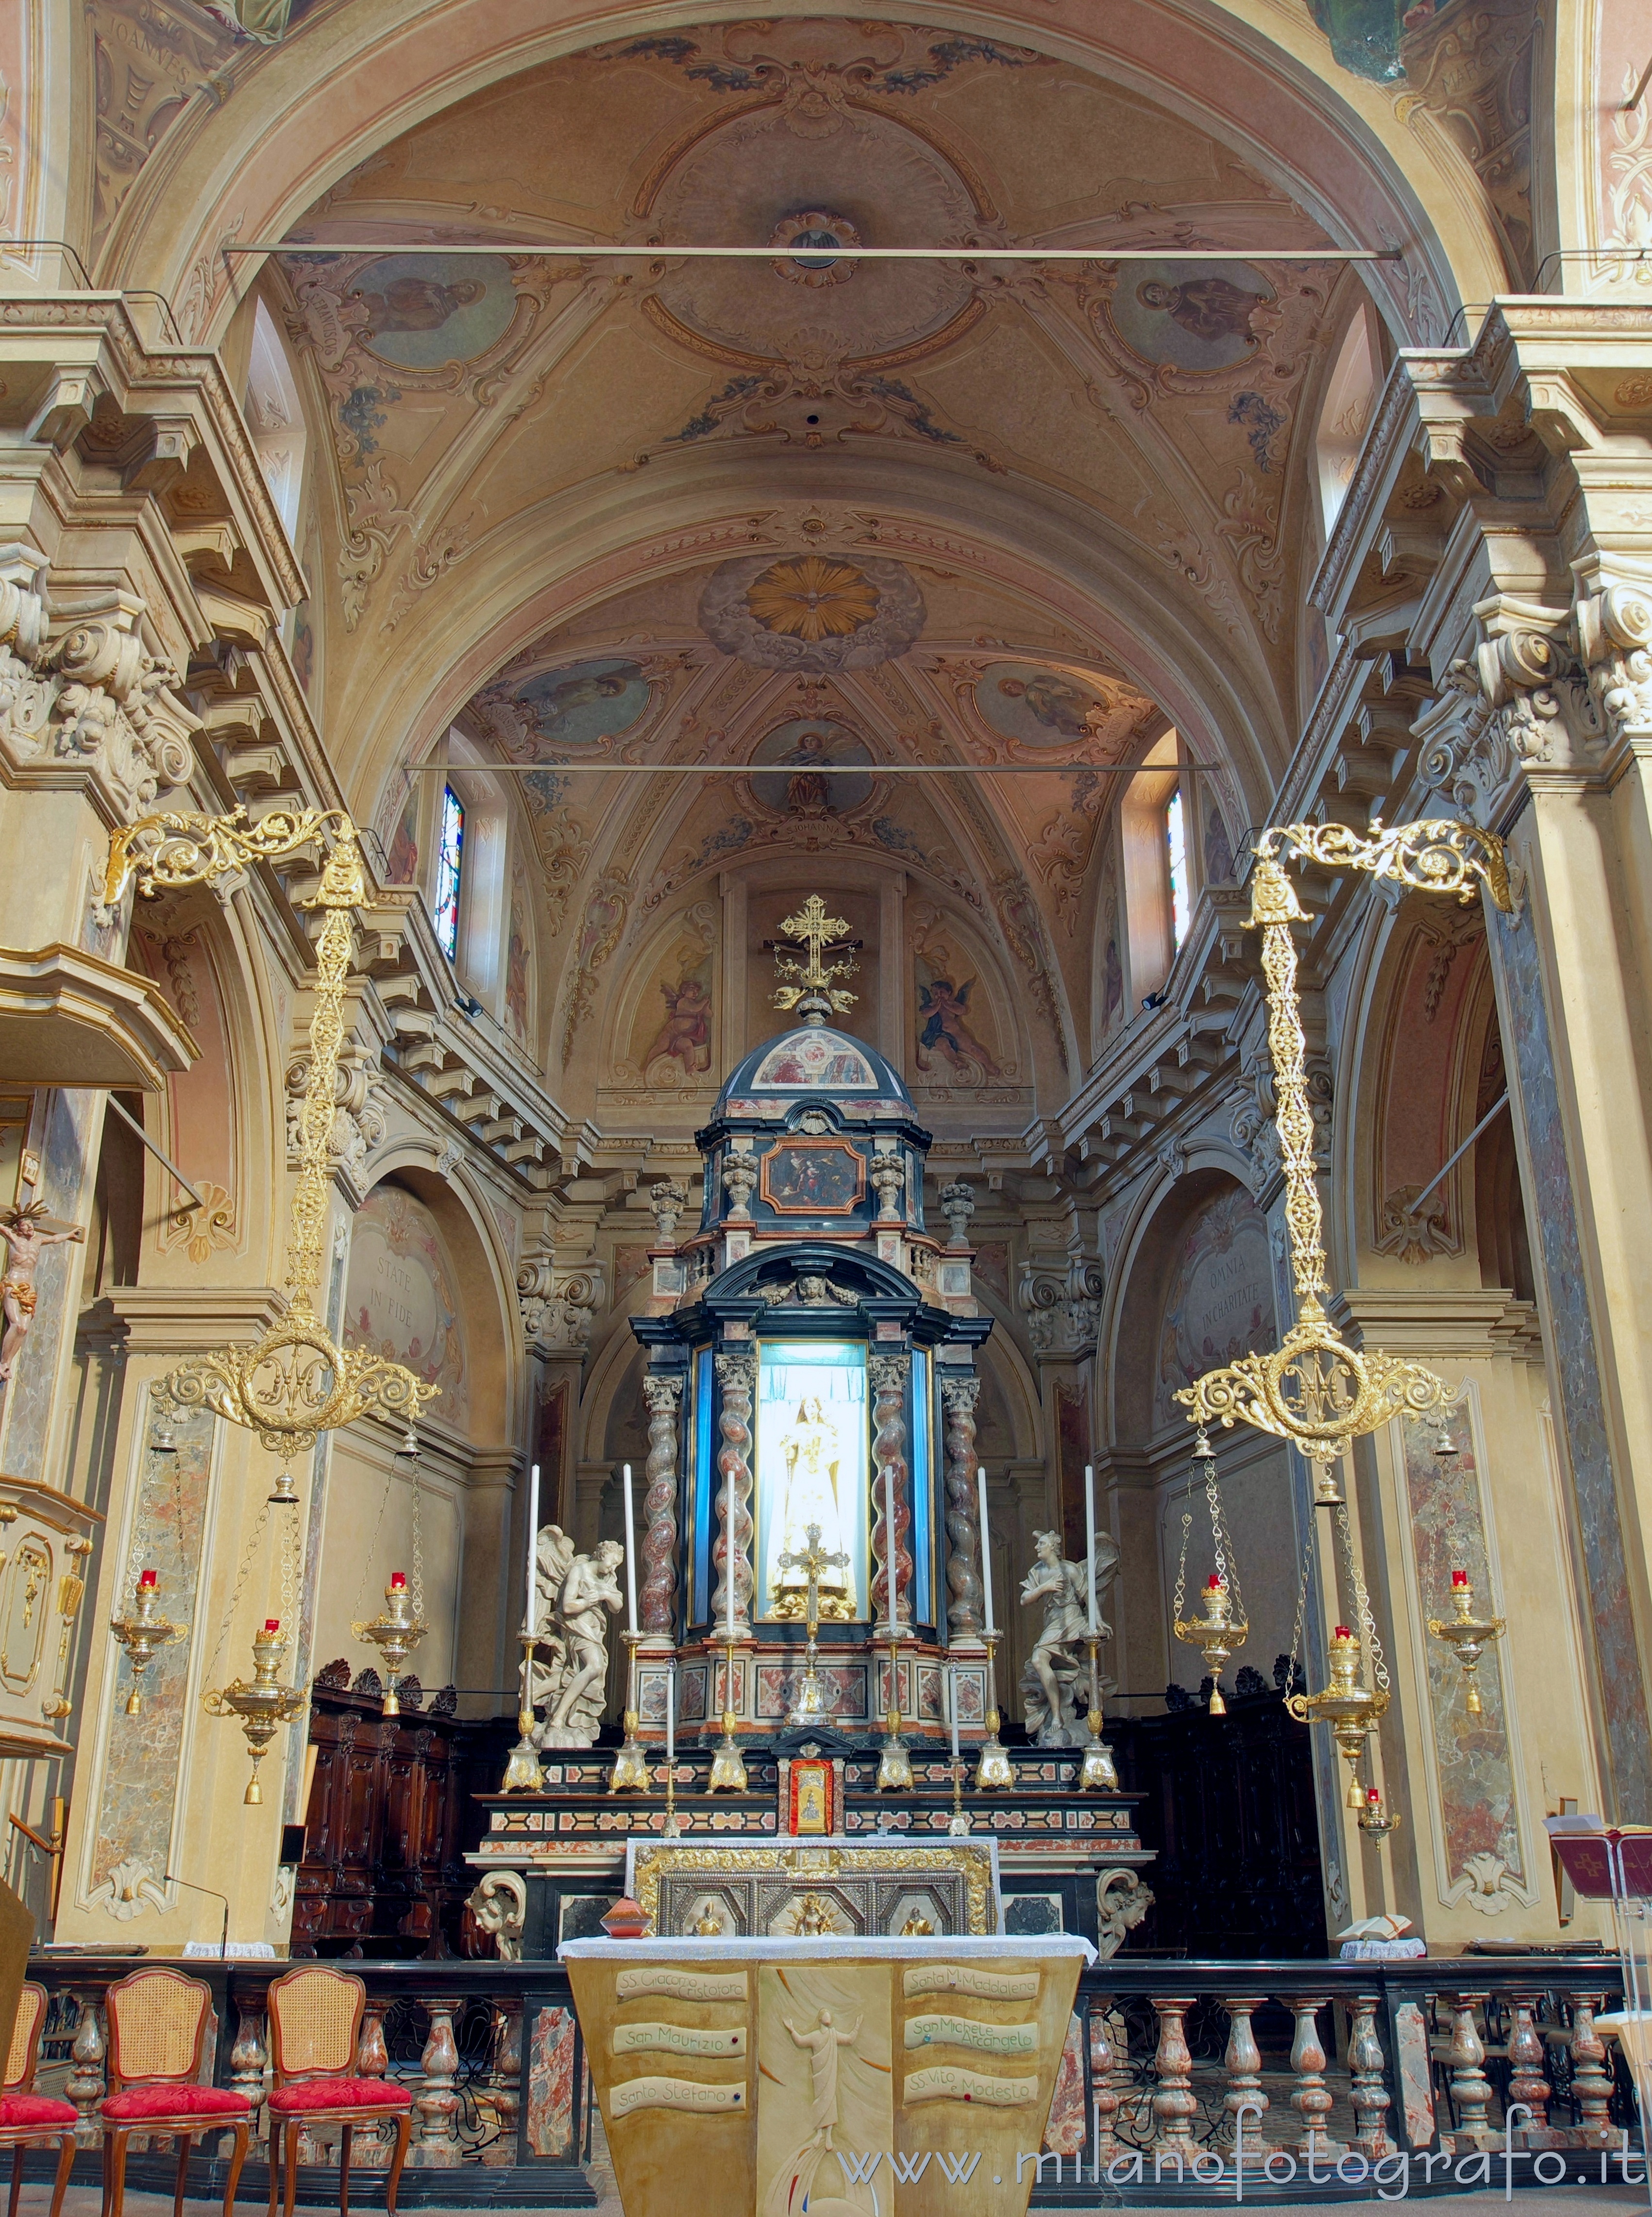 Vimercate (Monza e Brianza, Italy): Presbytery and apse of the Sanctuary of the Blessed Virgin of the Rosary - Vimercate (Monza e Brianza, Italy)